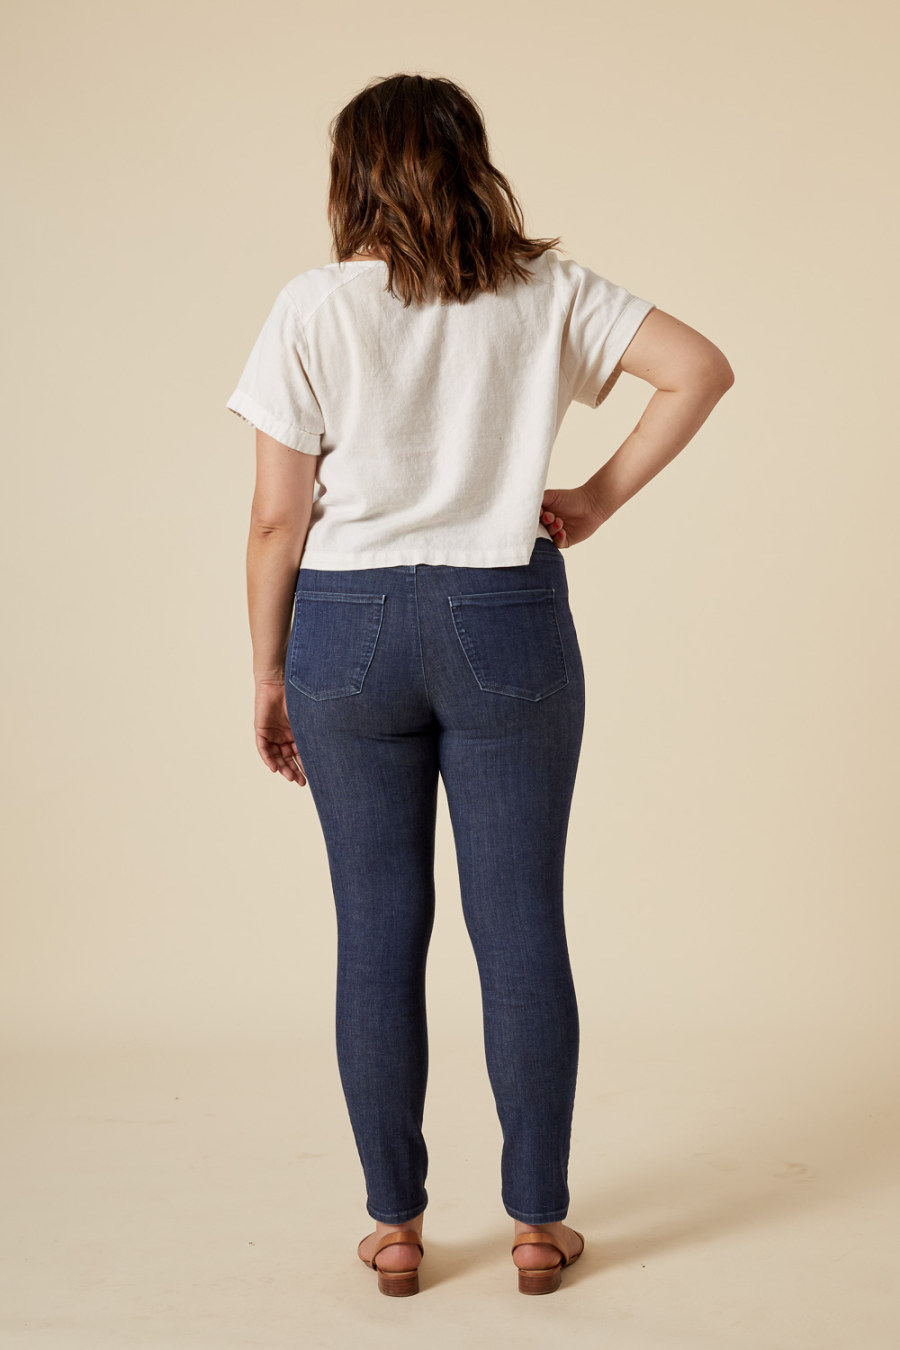 Ginger Skinny Jeans By Closet Core Patterns